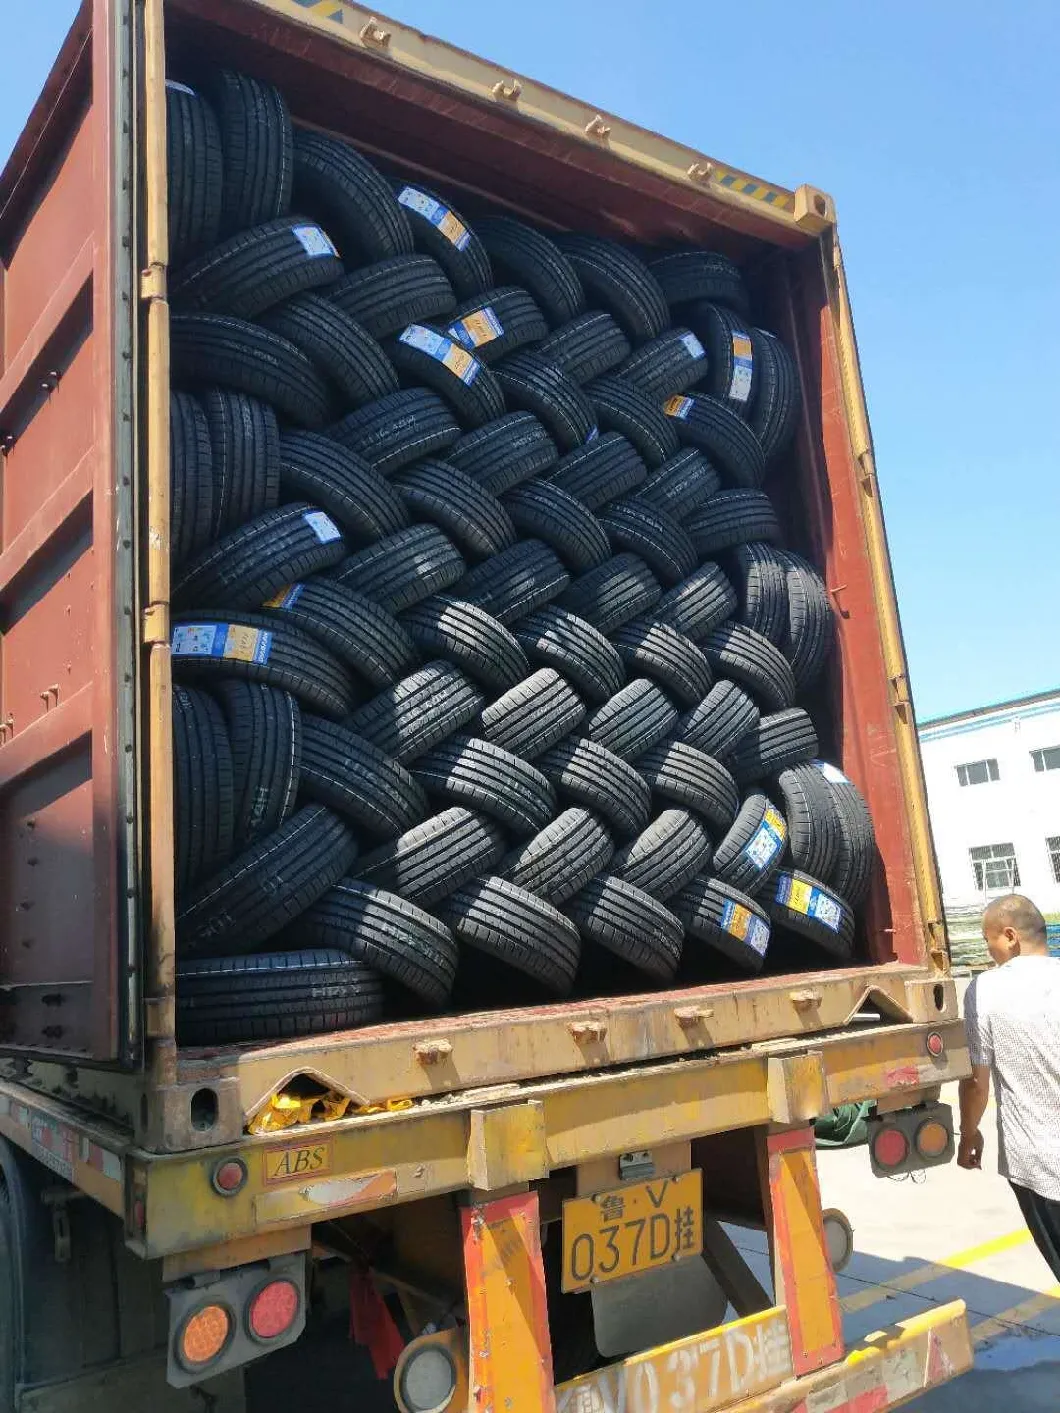 High Quality Cheap UHP Car Tyre for India with ECE, Bis, DOT Patter S2000 205/55r16 175/70r13